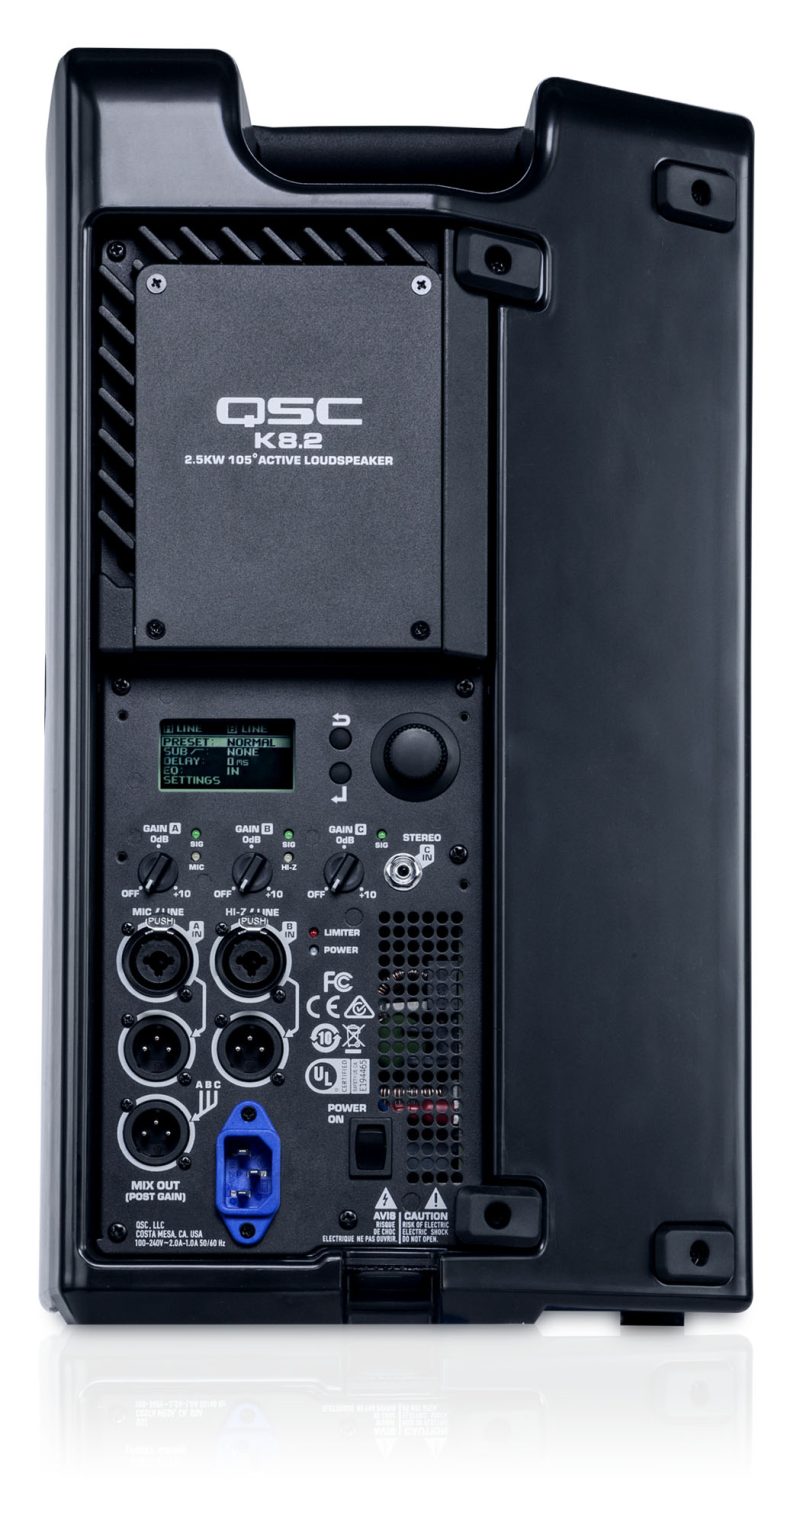 Connections of the QSC K8.2 Active Inch Loudspeaker